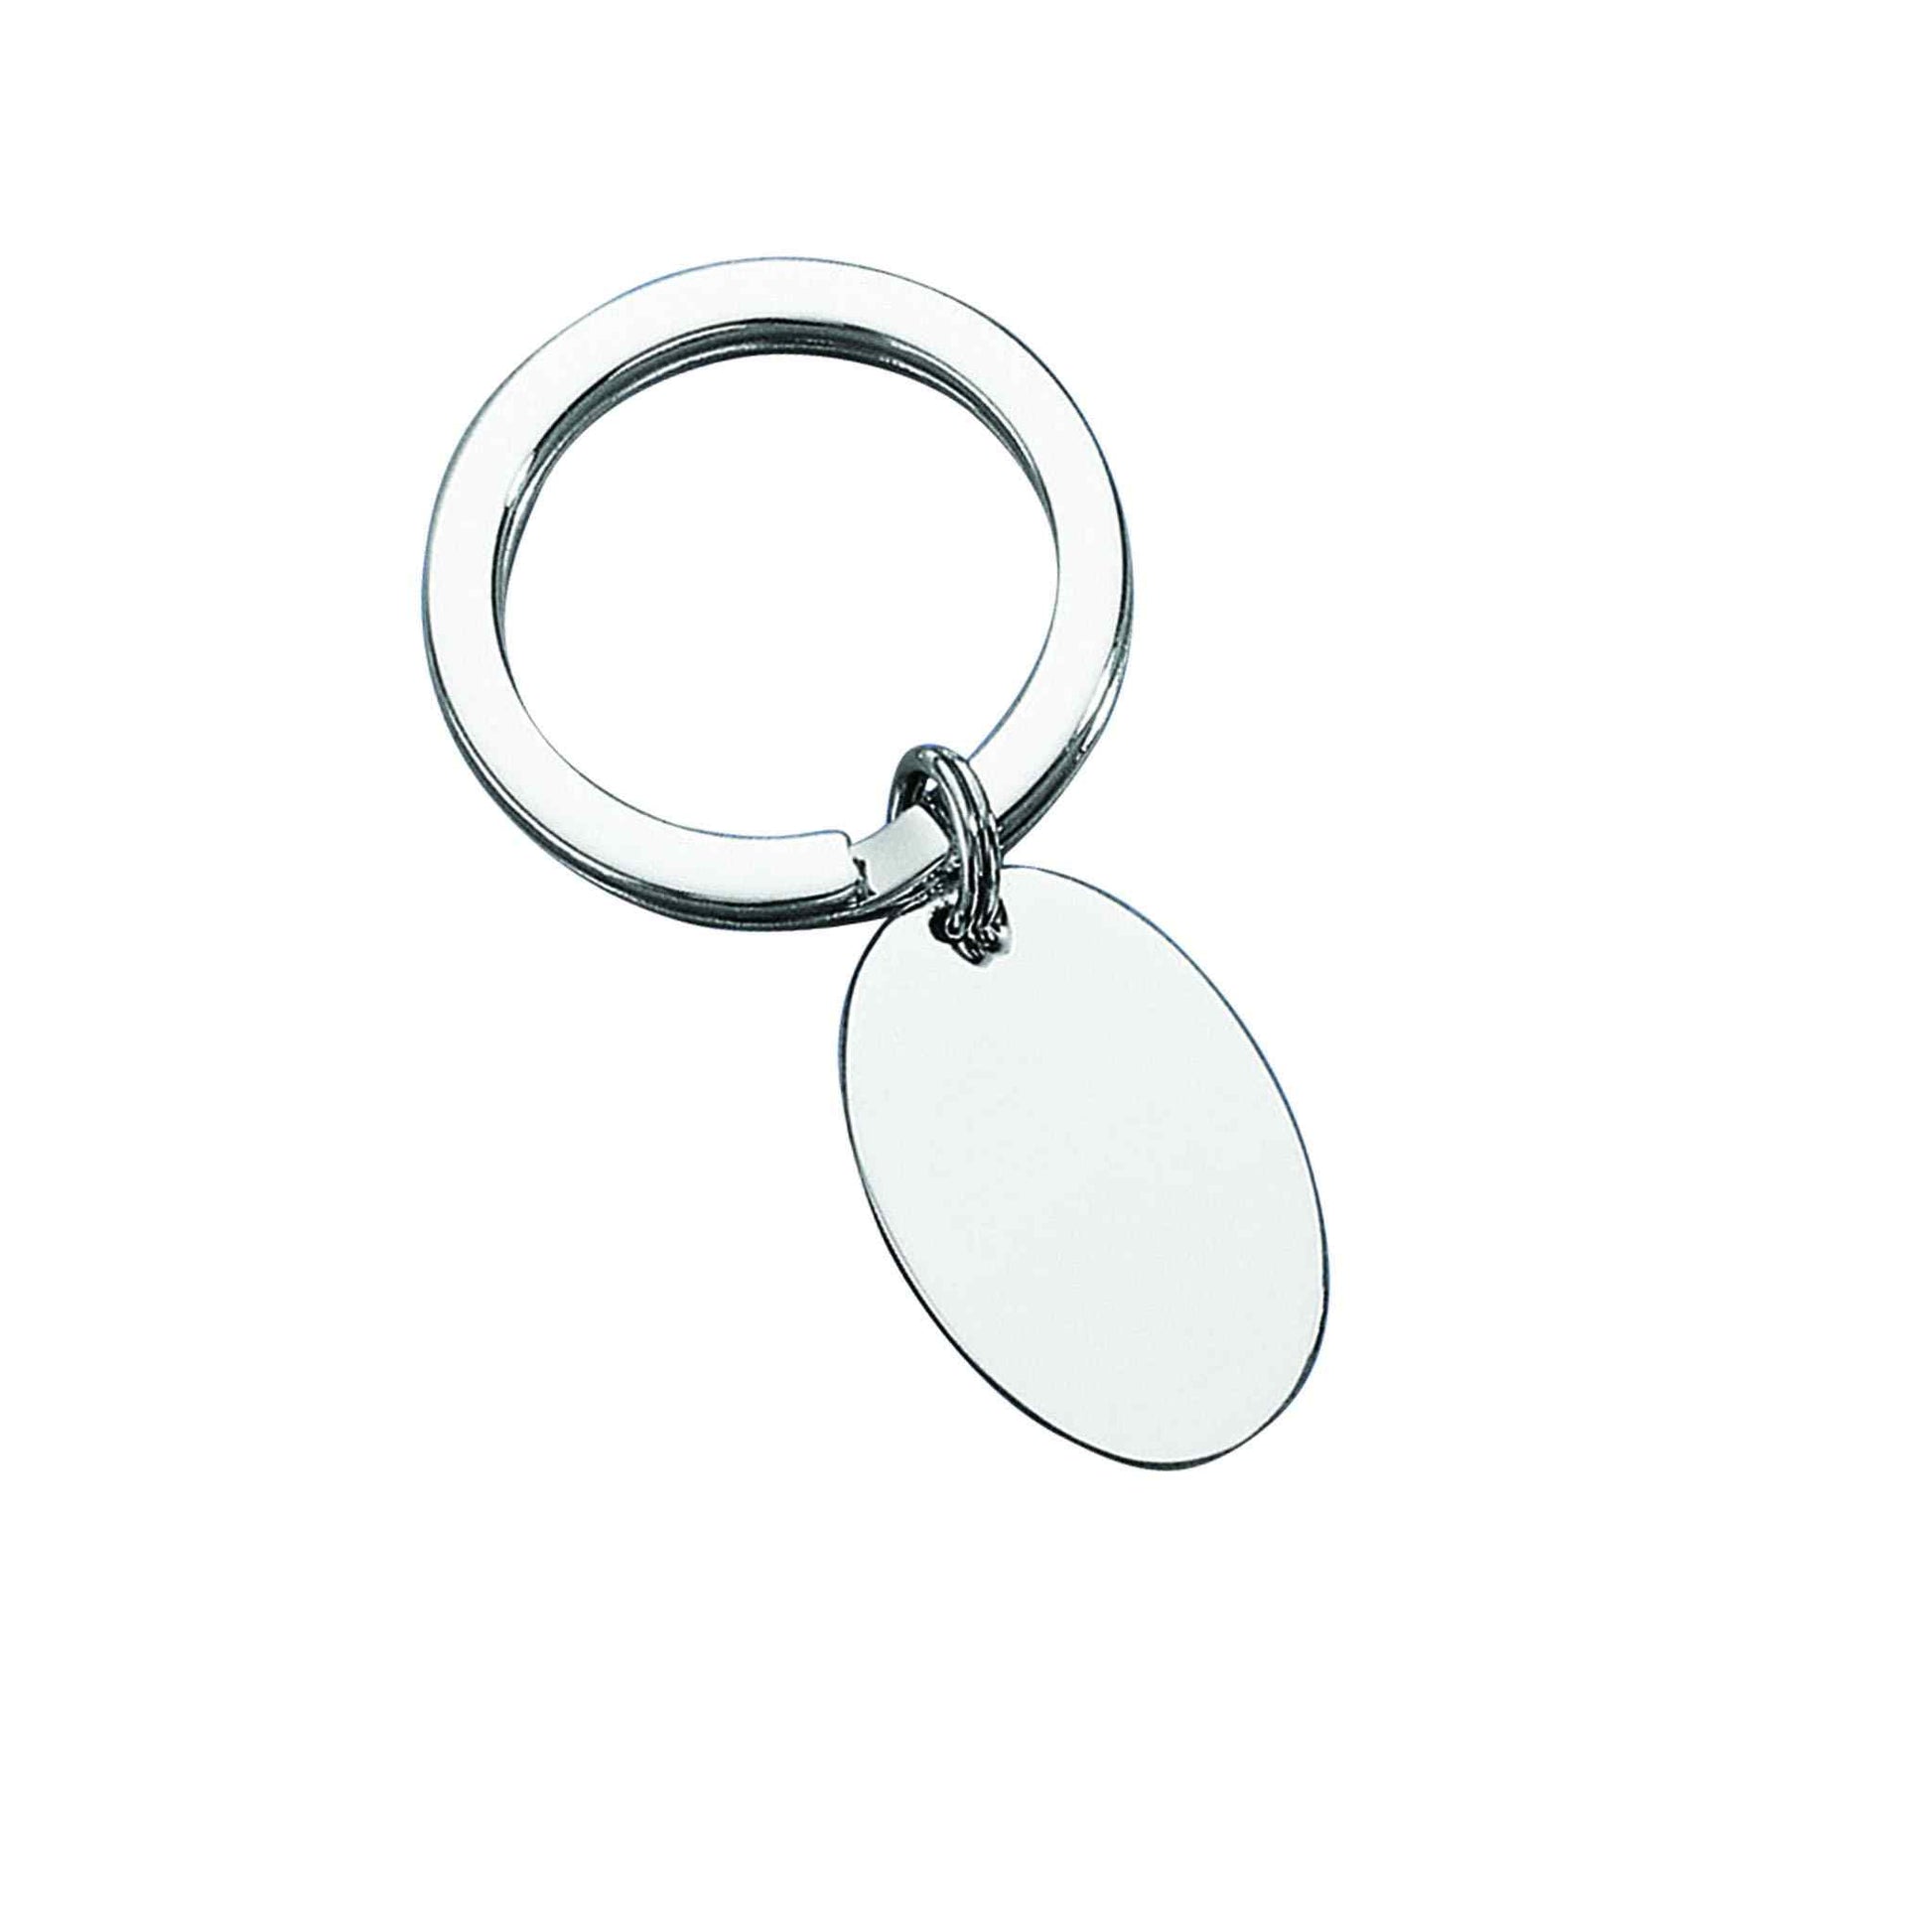 A sterling silver oval polished key ring displayed on a neutral white background.